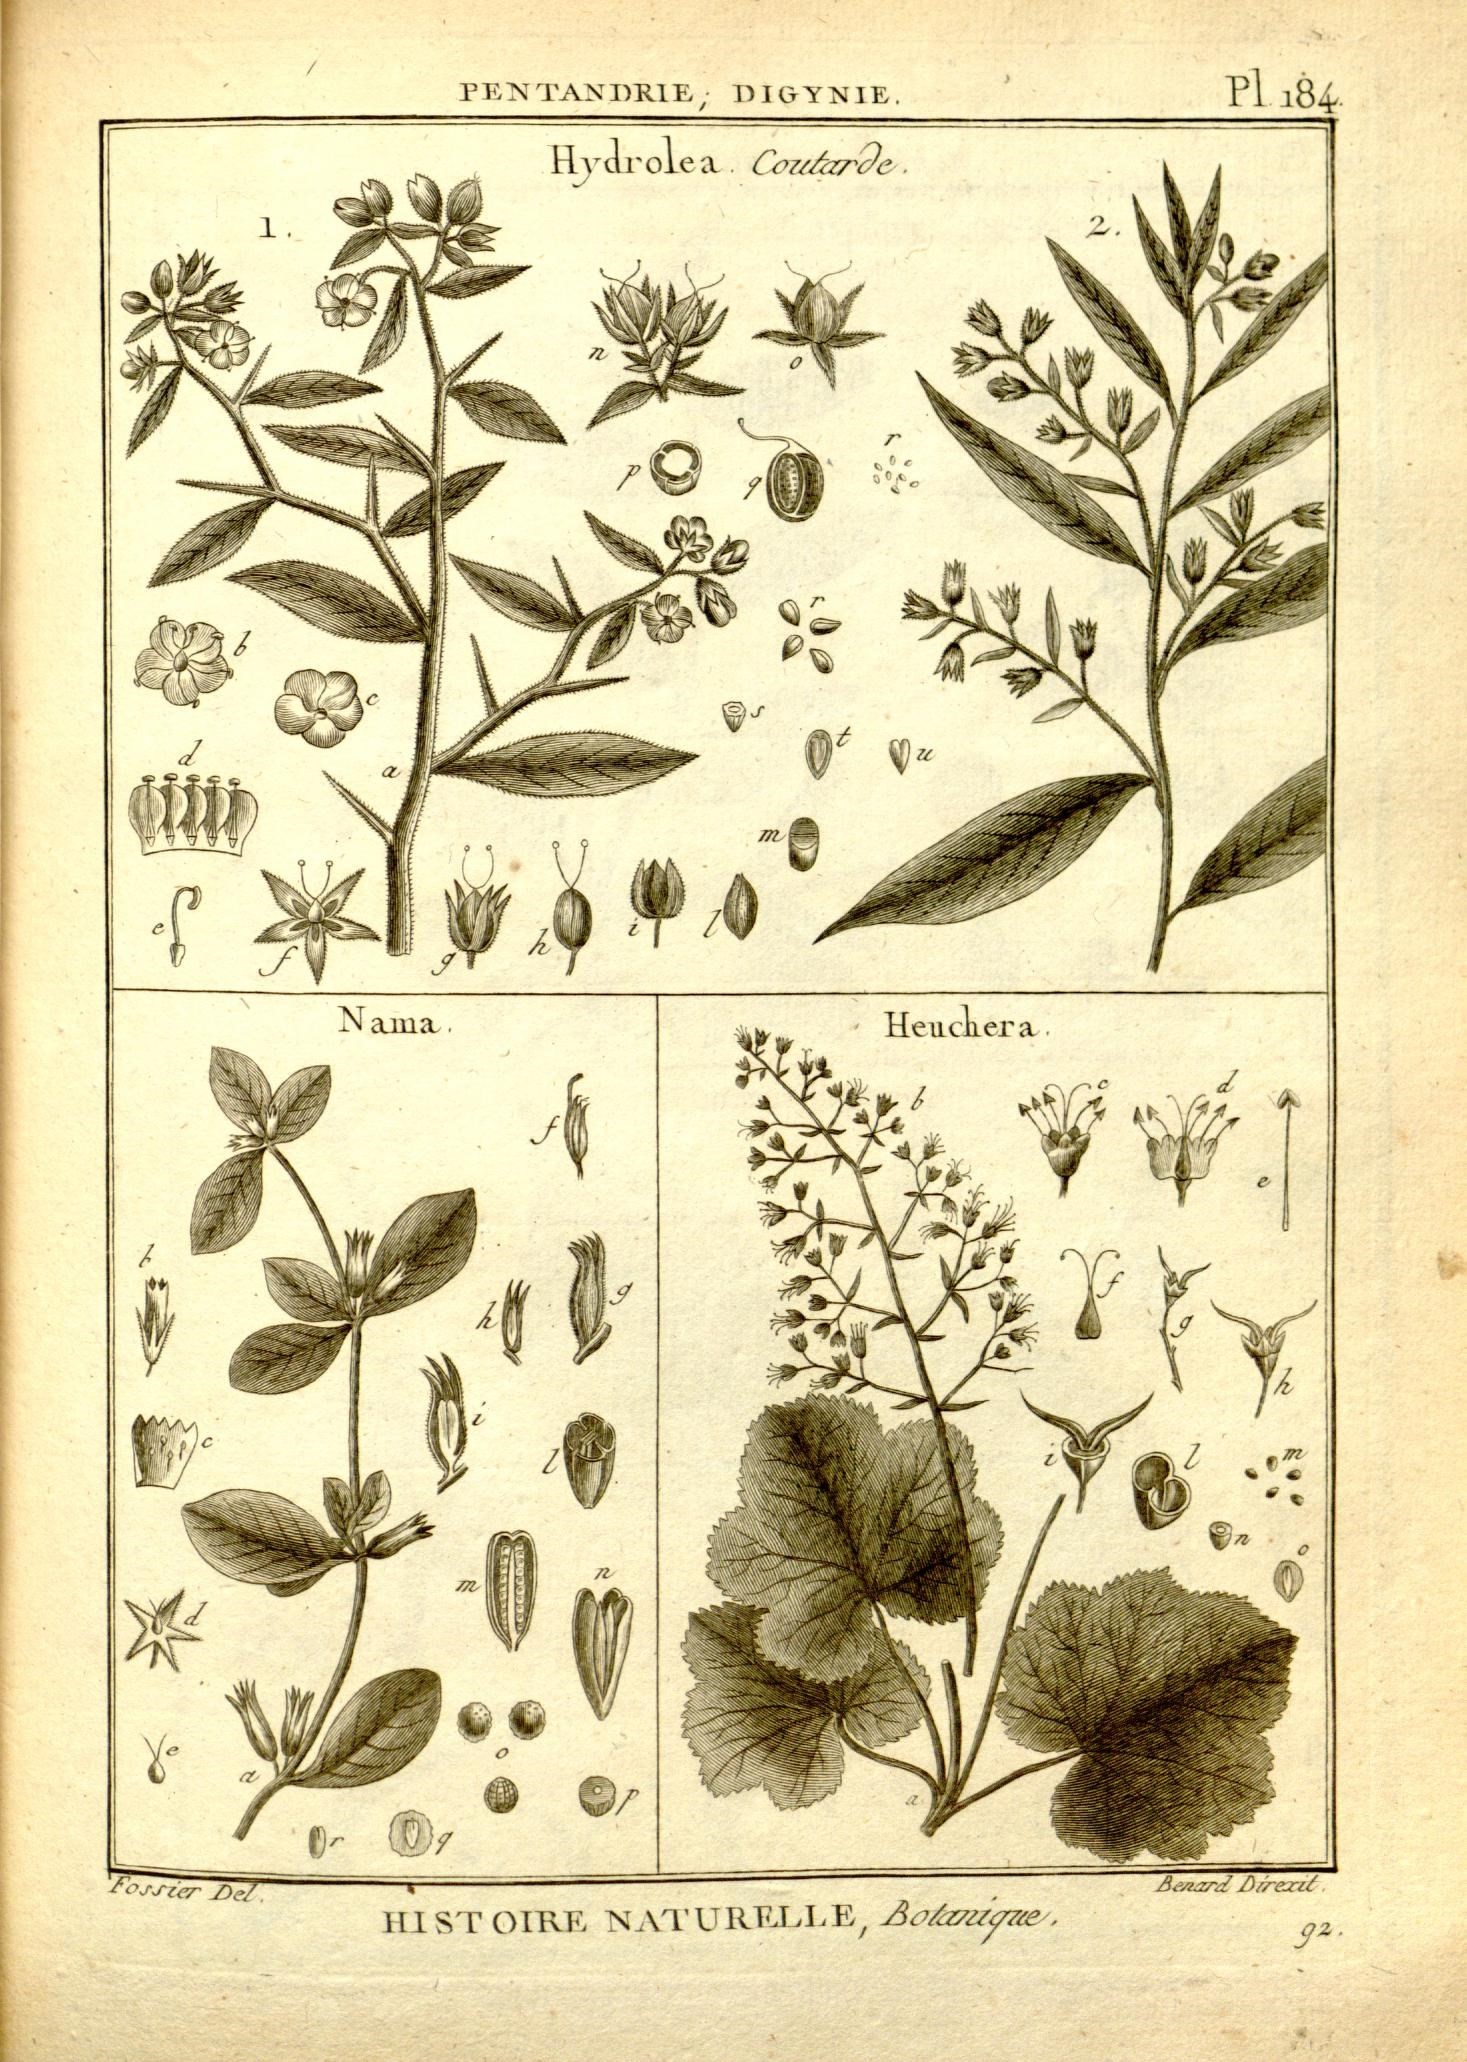 the page is showing various flowers and plants in it